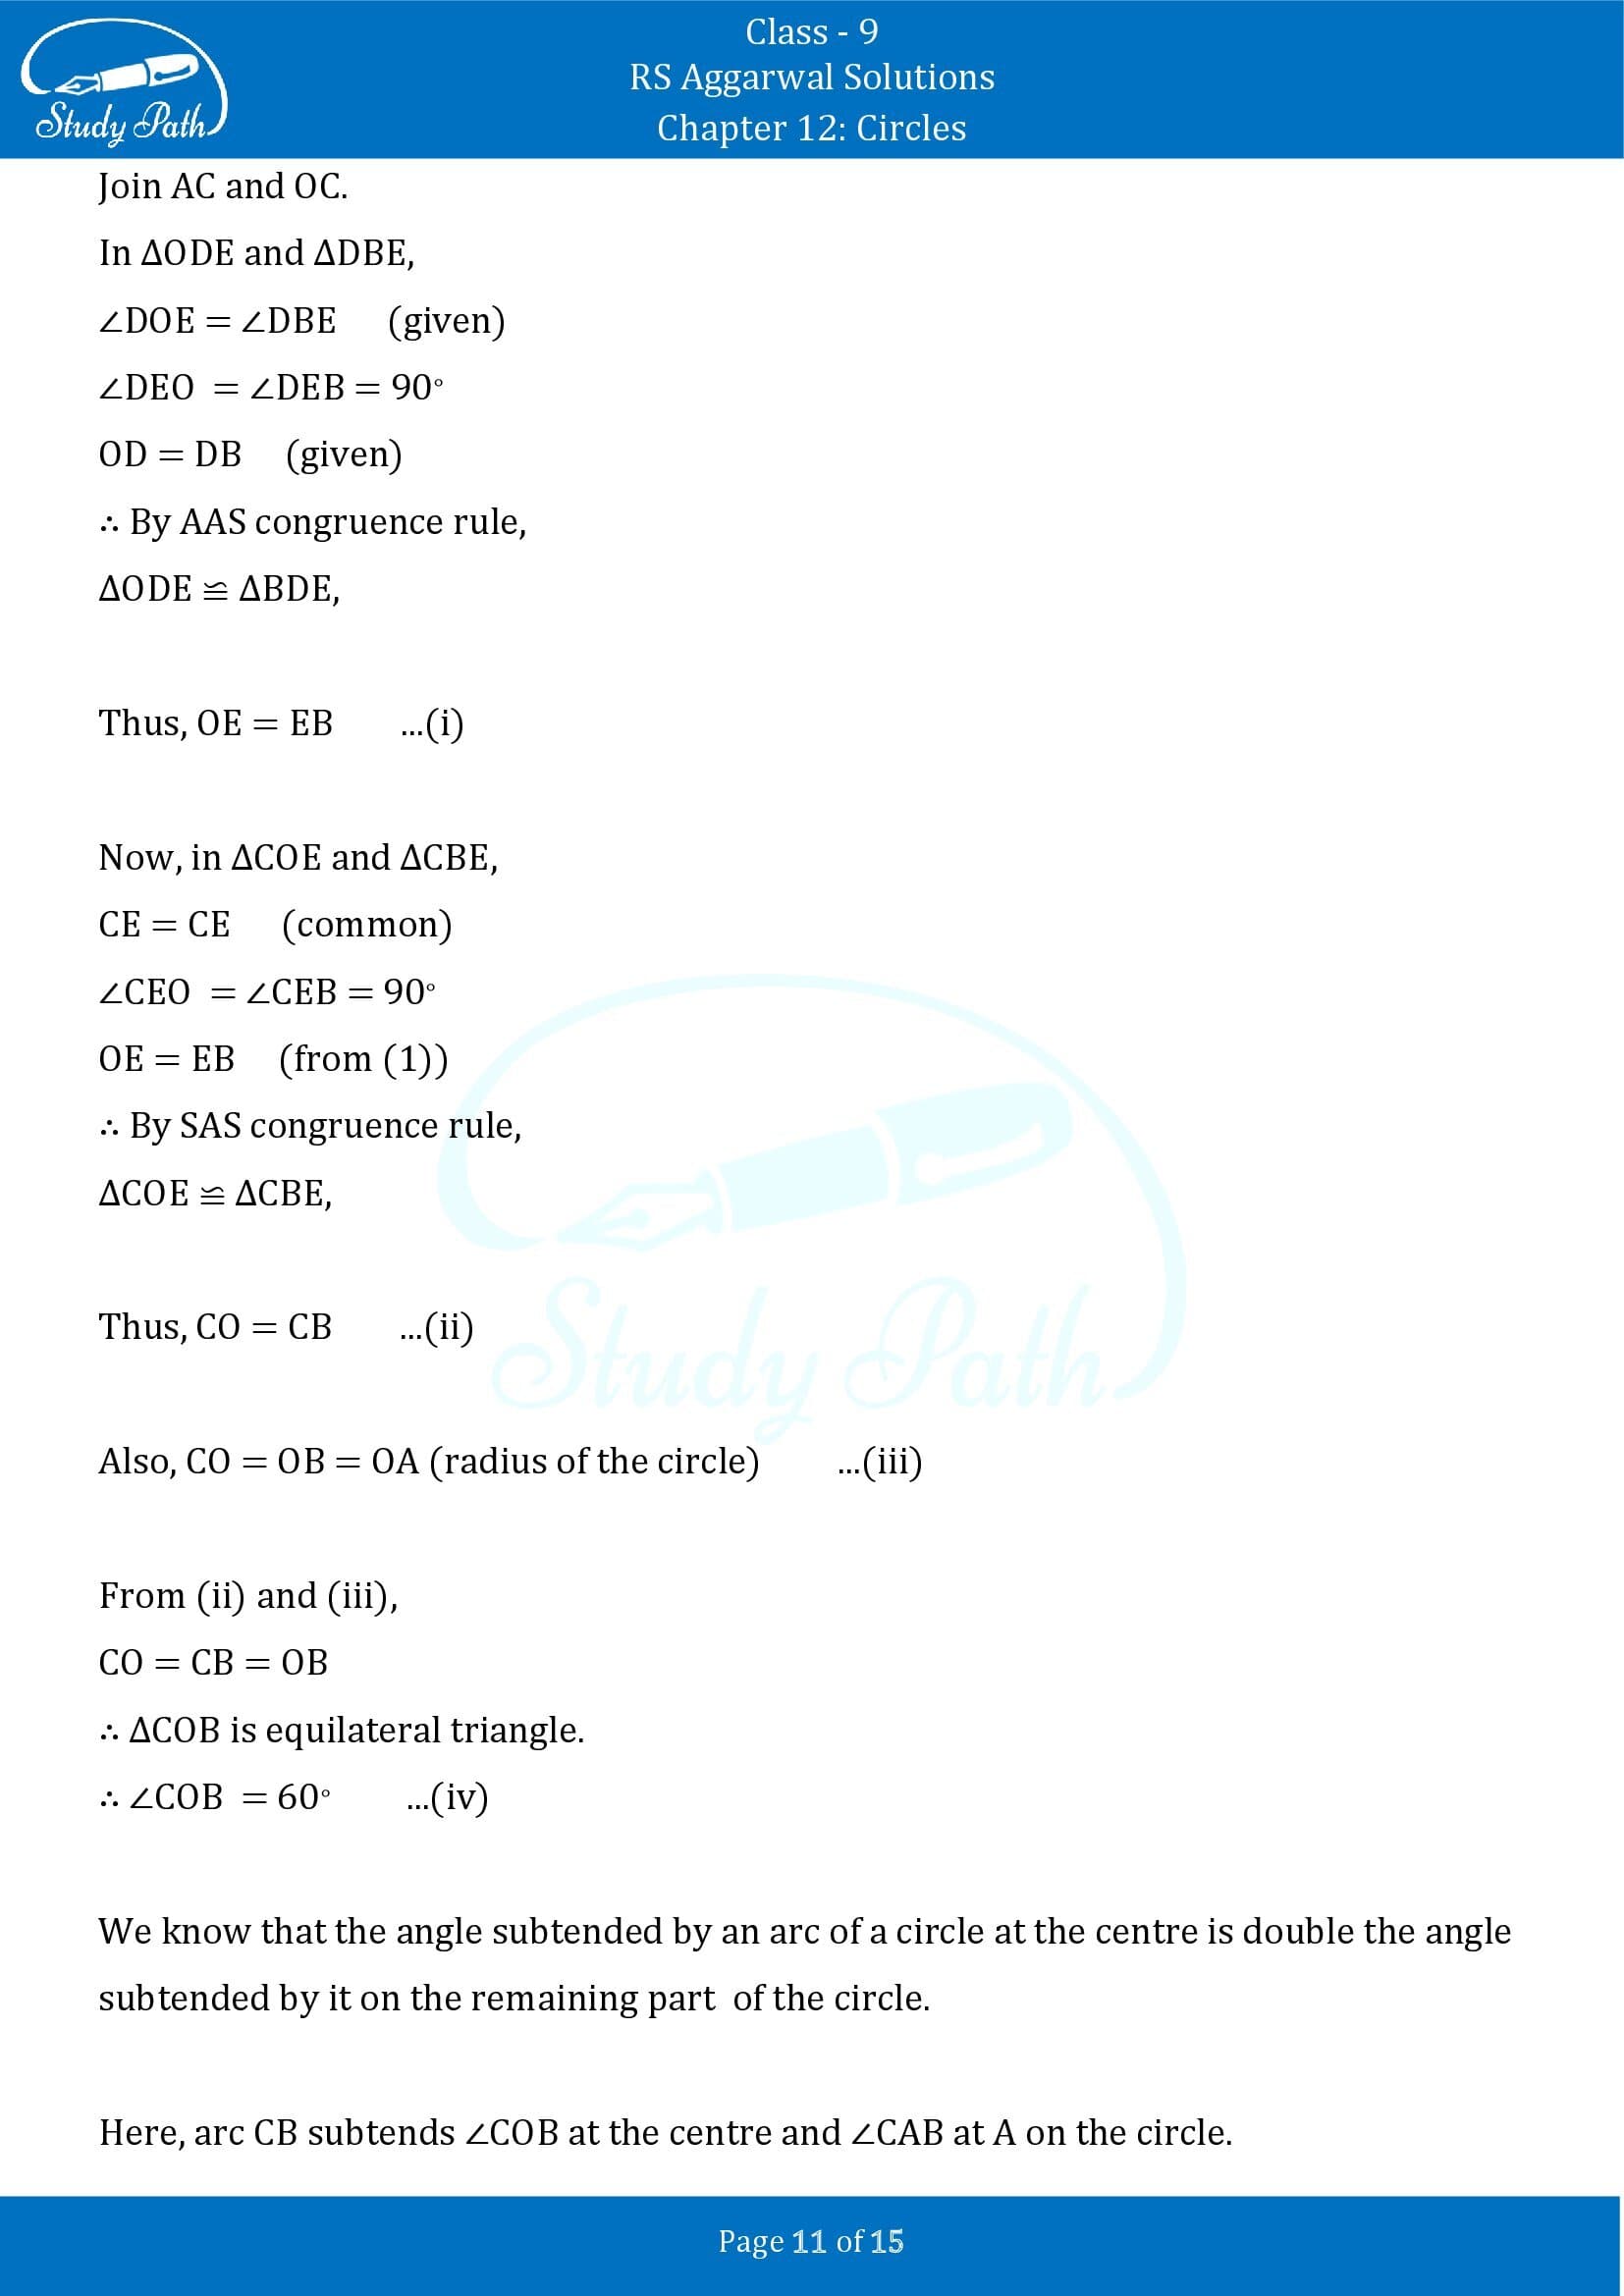 RS Aggarwal Solutions Class 9 Chapter 12 Circles Exercise 12B 00011